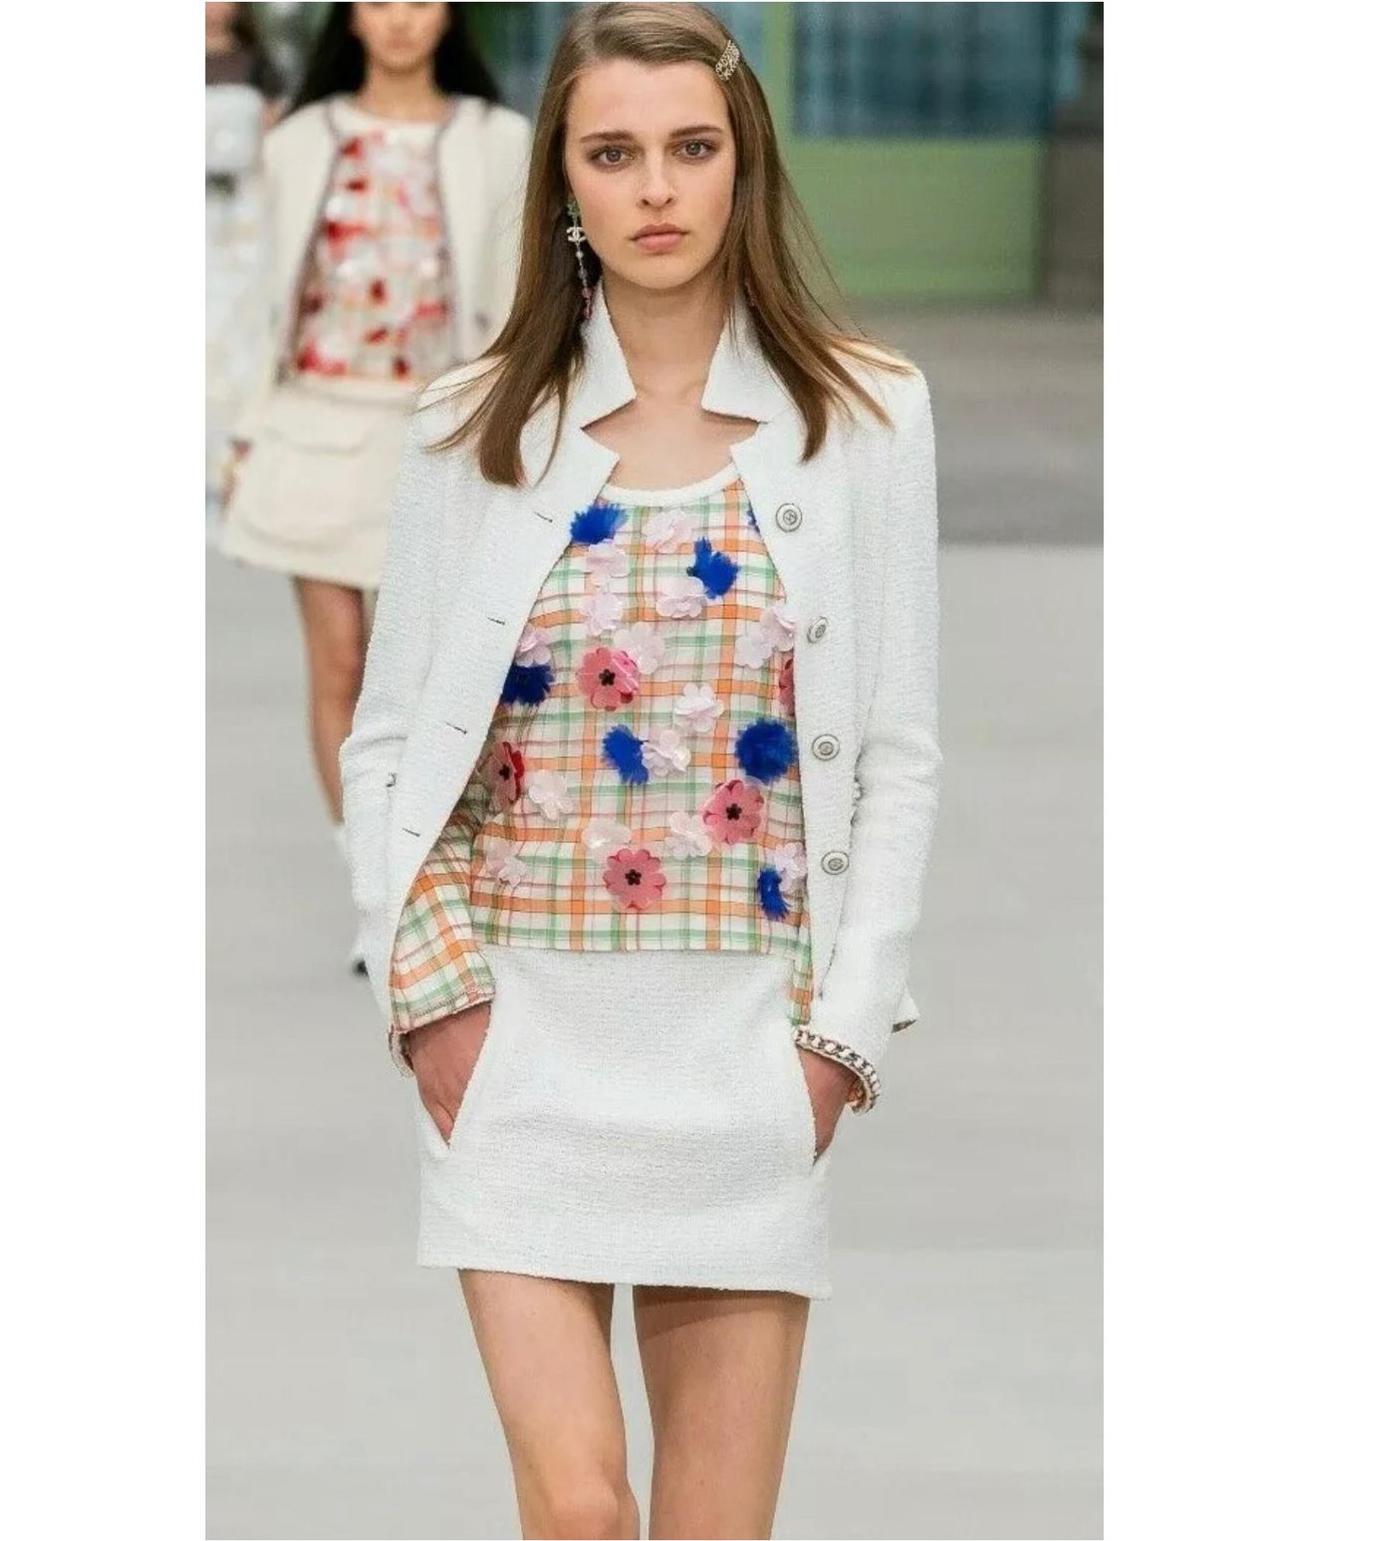 Chanel New 2020 Cruise Runway Tweed Jacket In New Condition For Sale In Dubai, AE